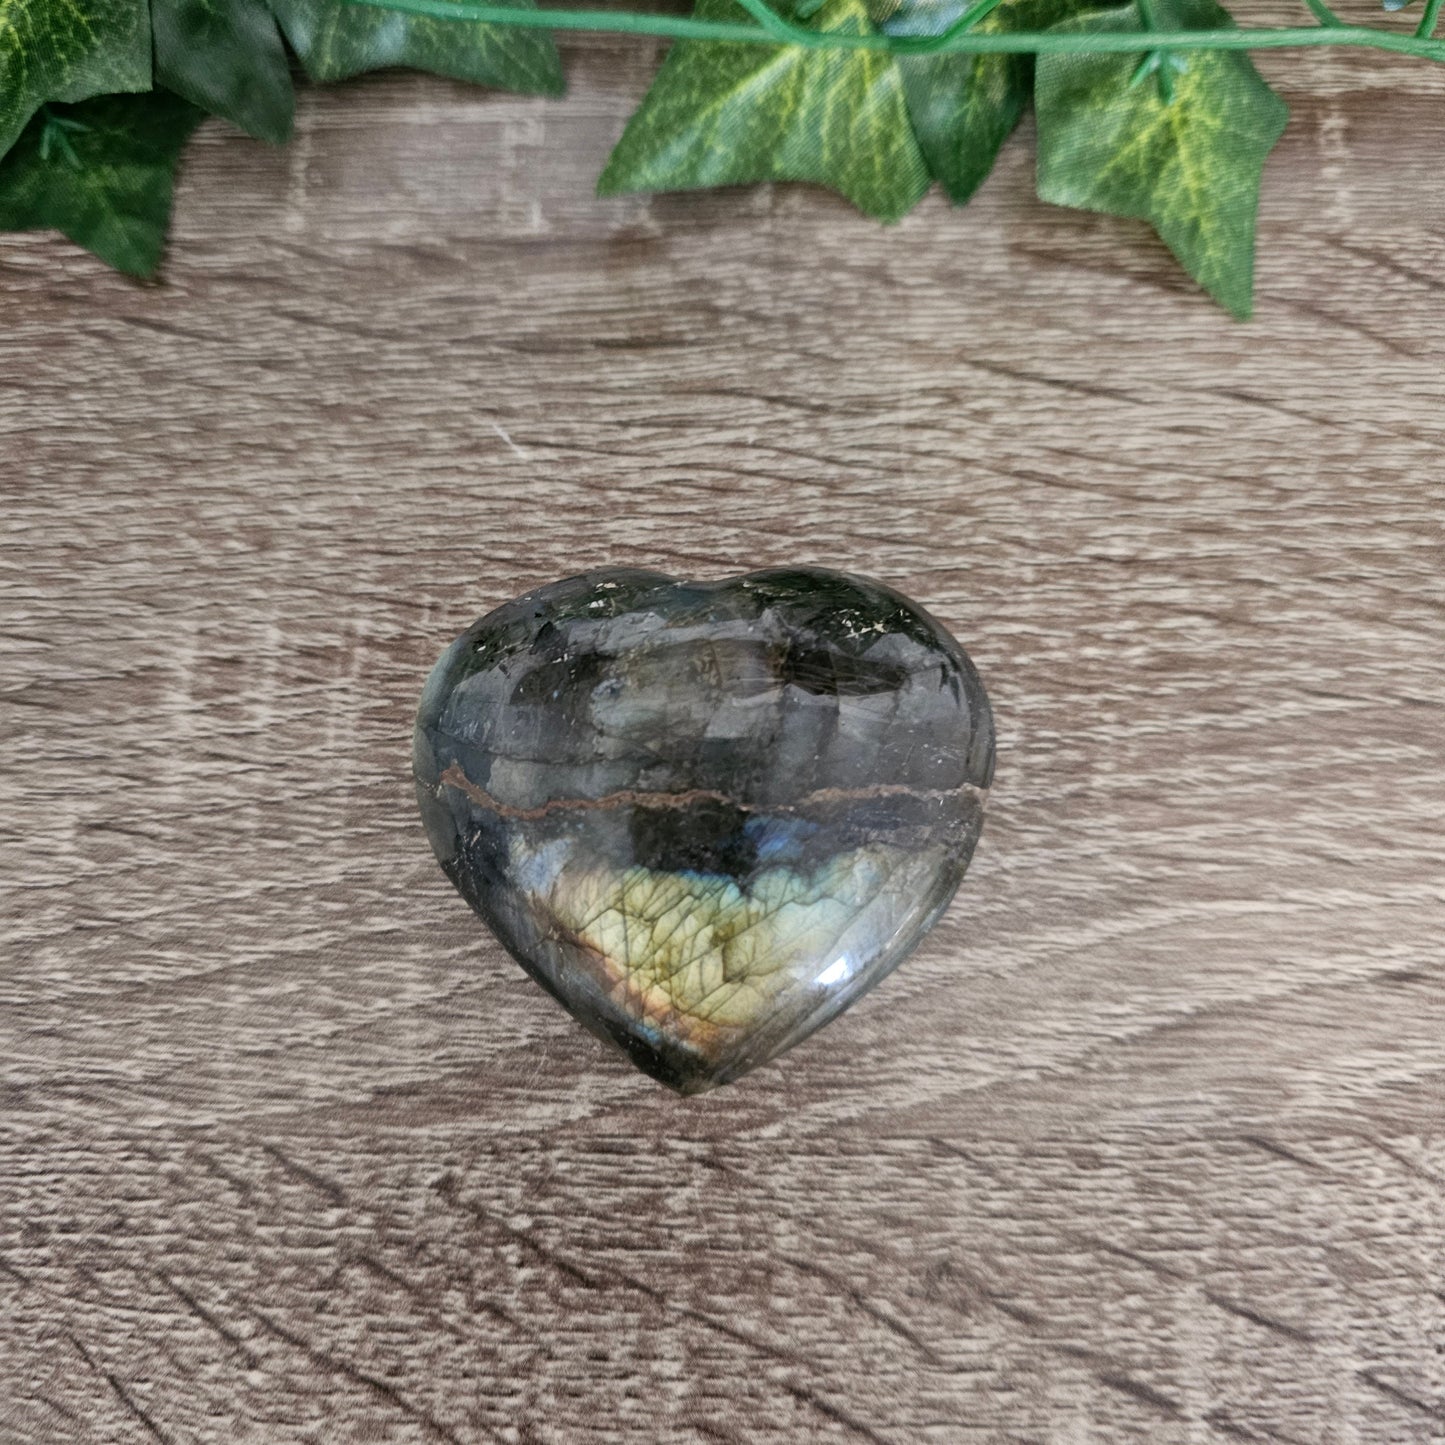 LABRADORITE 4 Piece Set - Tower, Sphere, Heart, Palm Stone - Transformation, Protection, Clarity, Personal Magick - Ritual & Altar Tools